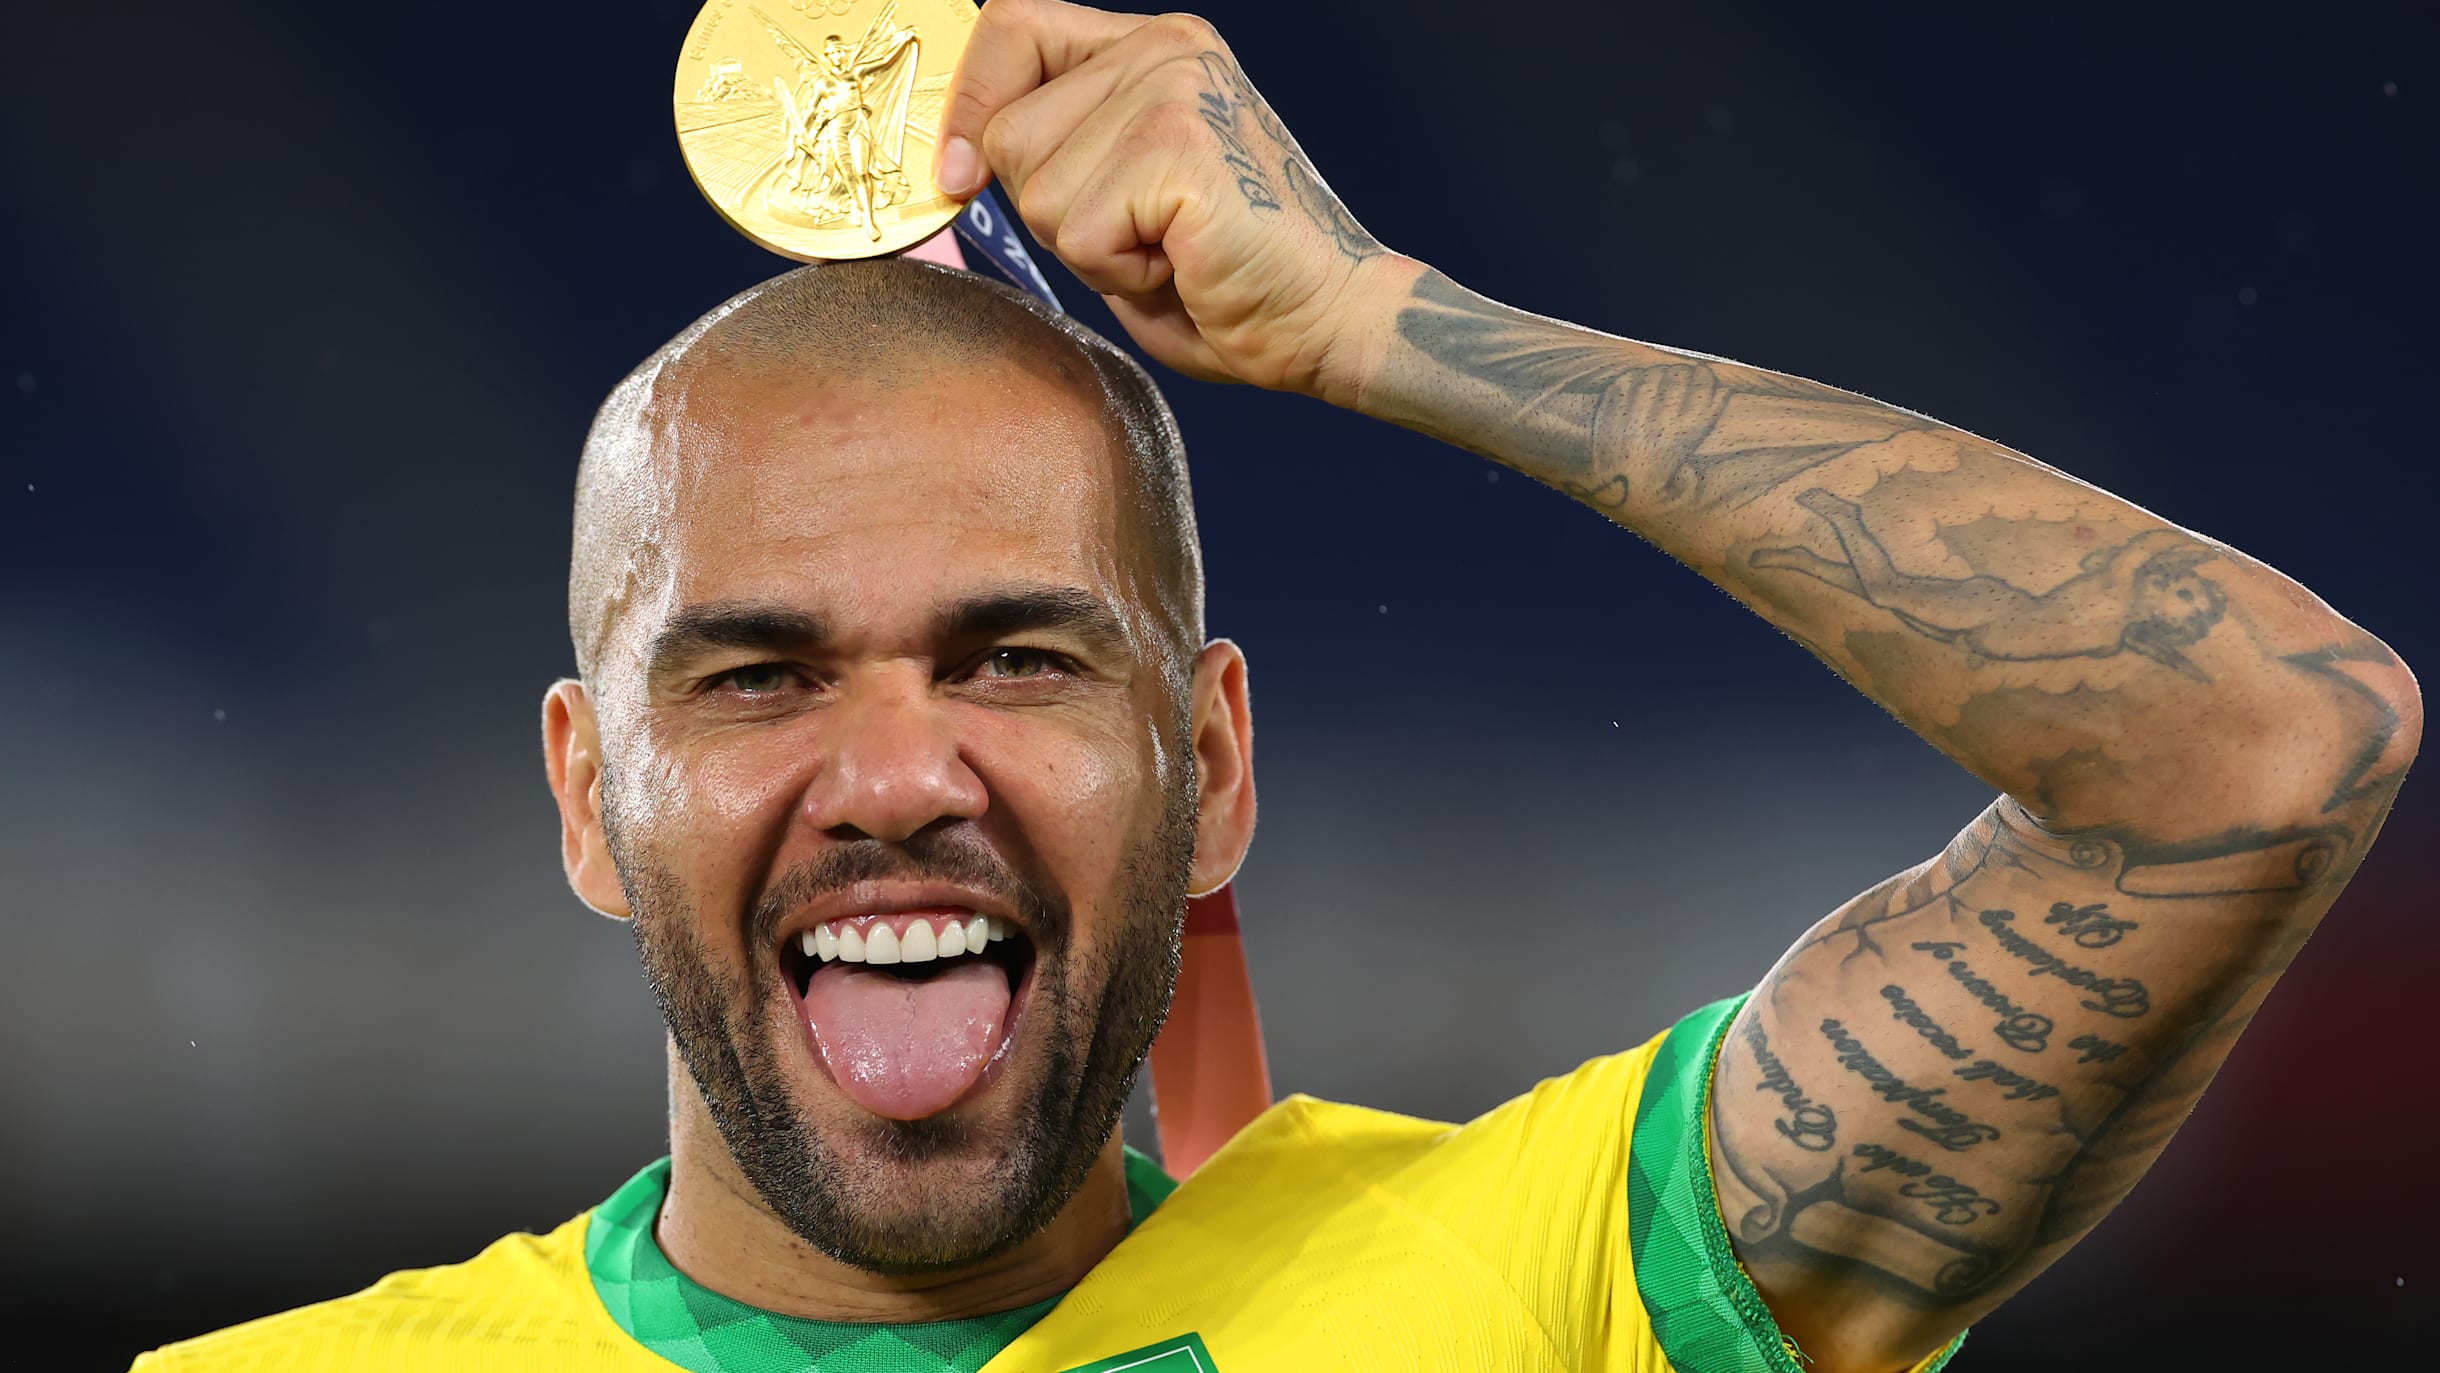 Dani Alves at FIFA World Cup: Records and stats